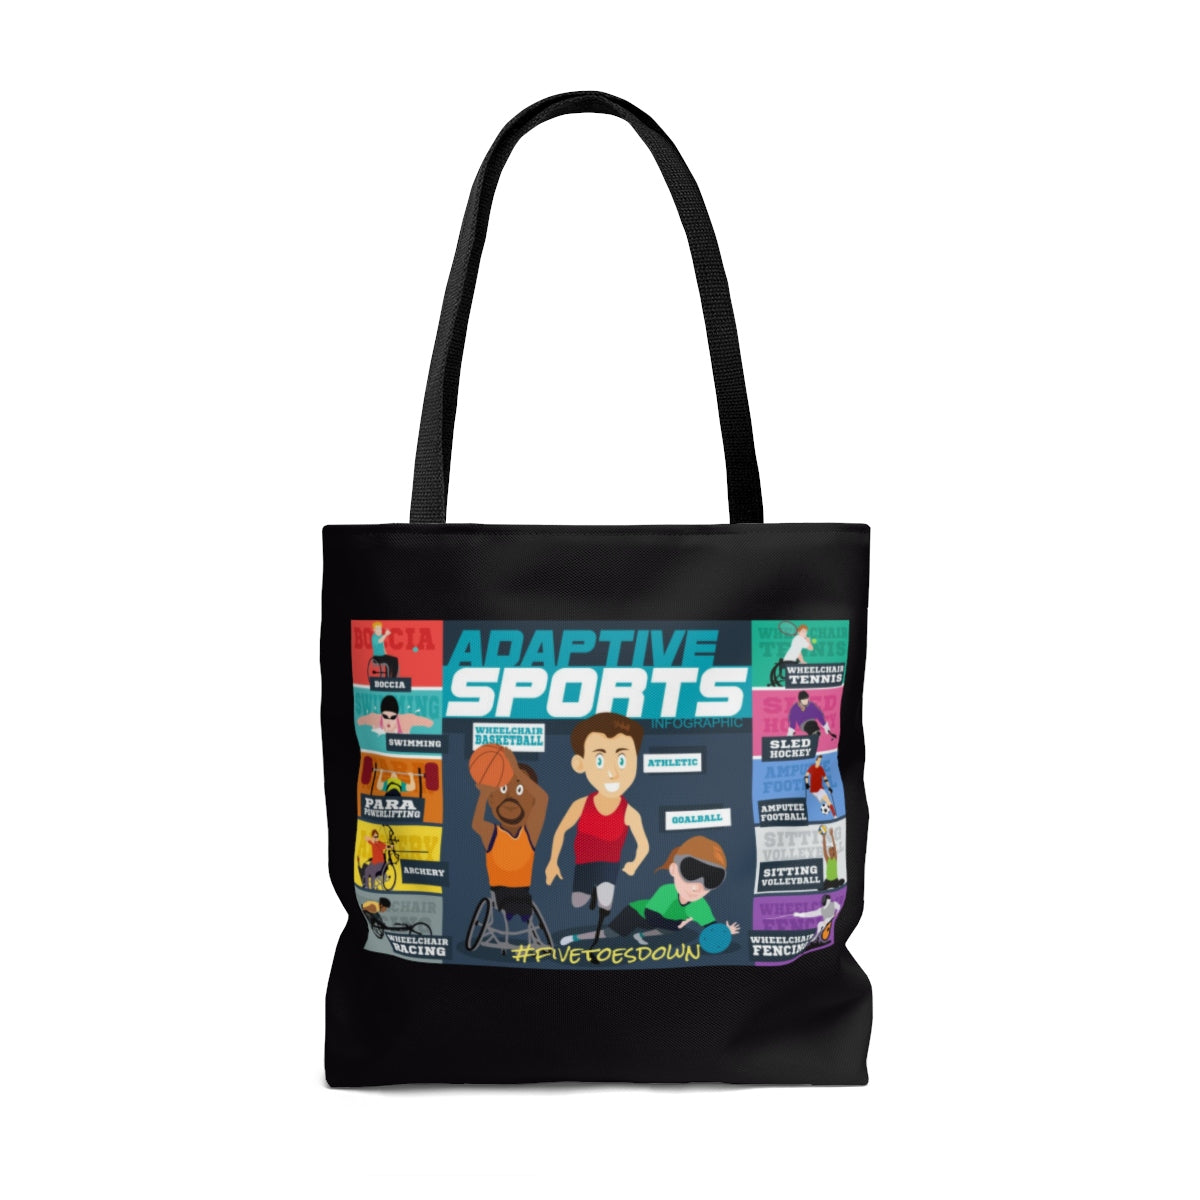 Five Toes Down Amp Sports Tote Bag